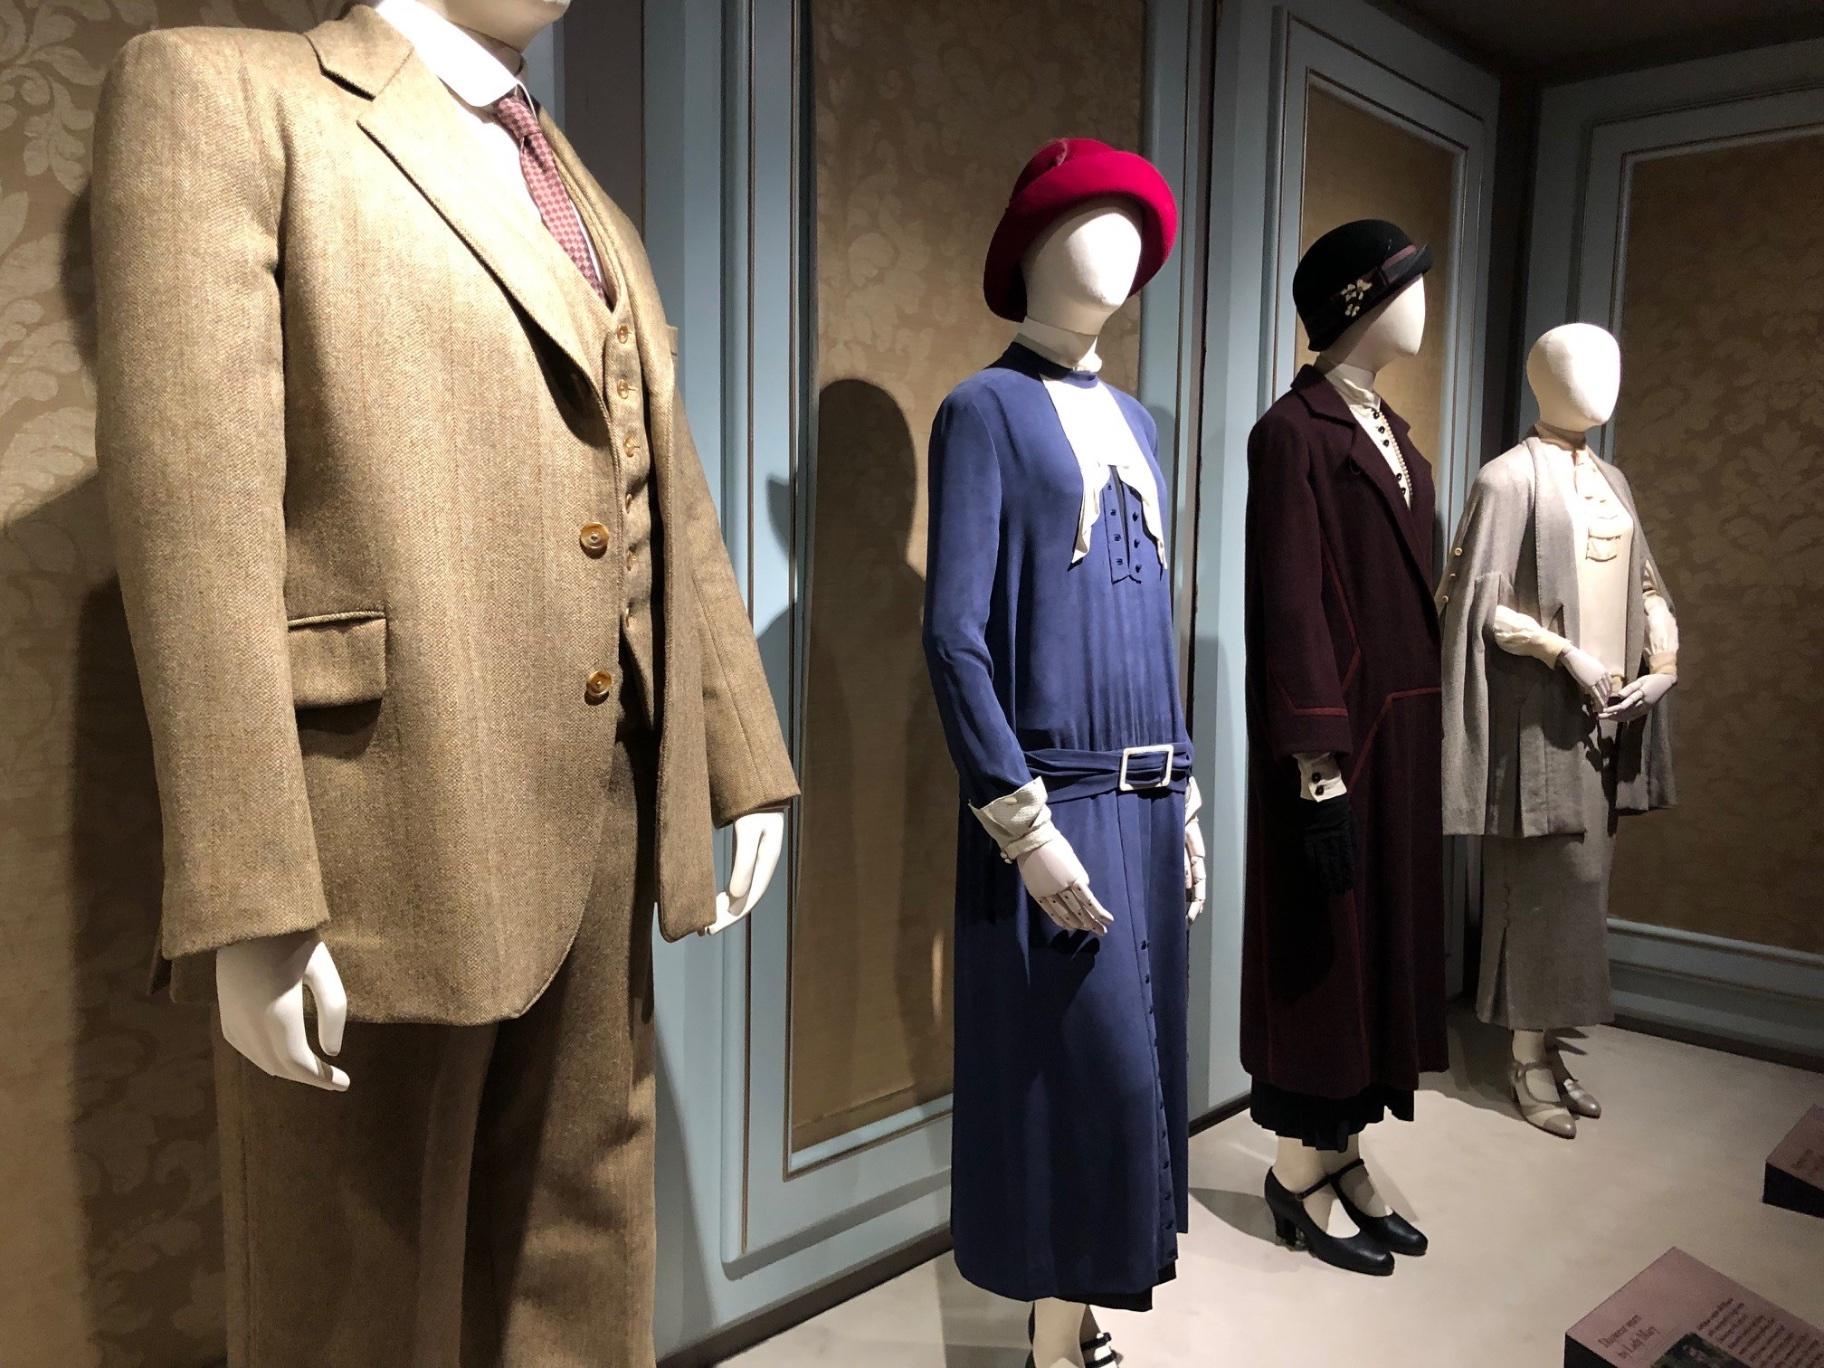 Costumes are a star attraction at Downton Abbey: The Exhibition.” (Marc Vitali / WTTW News)